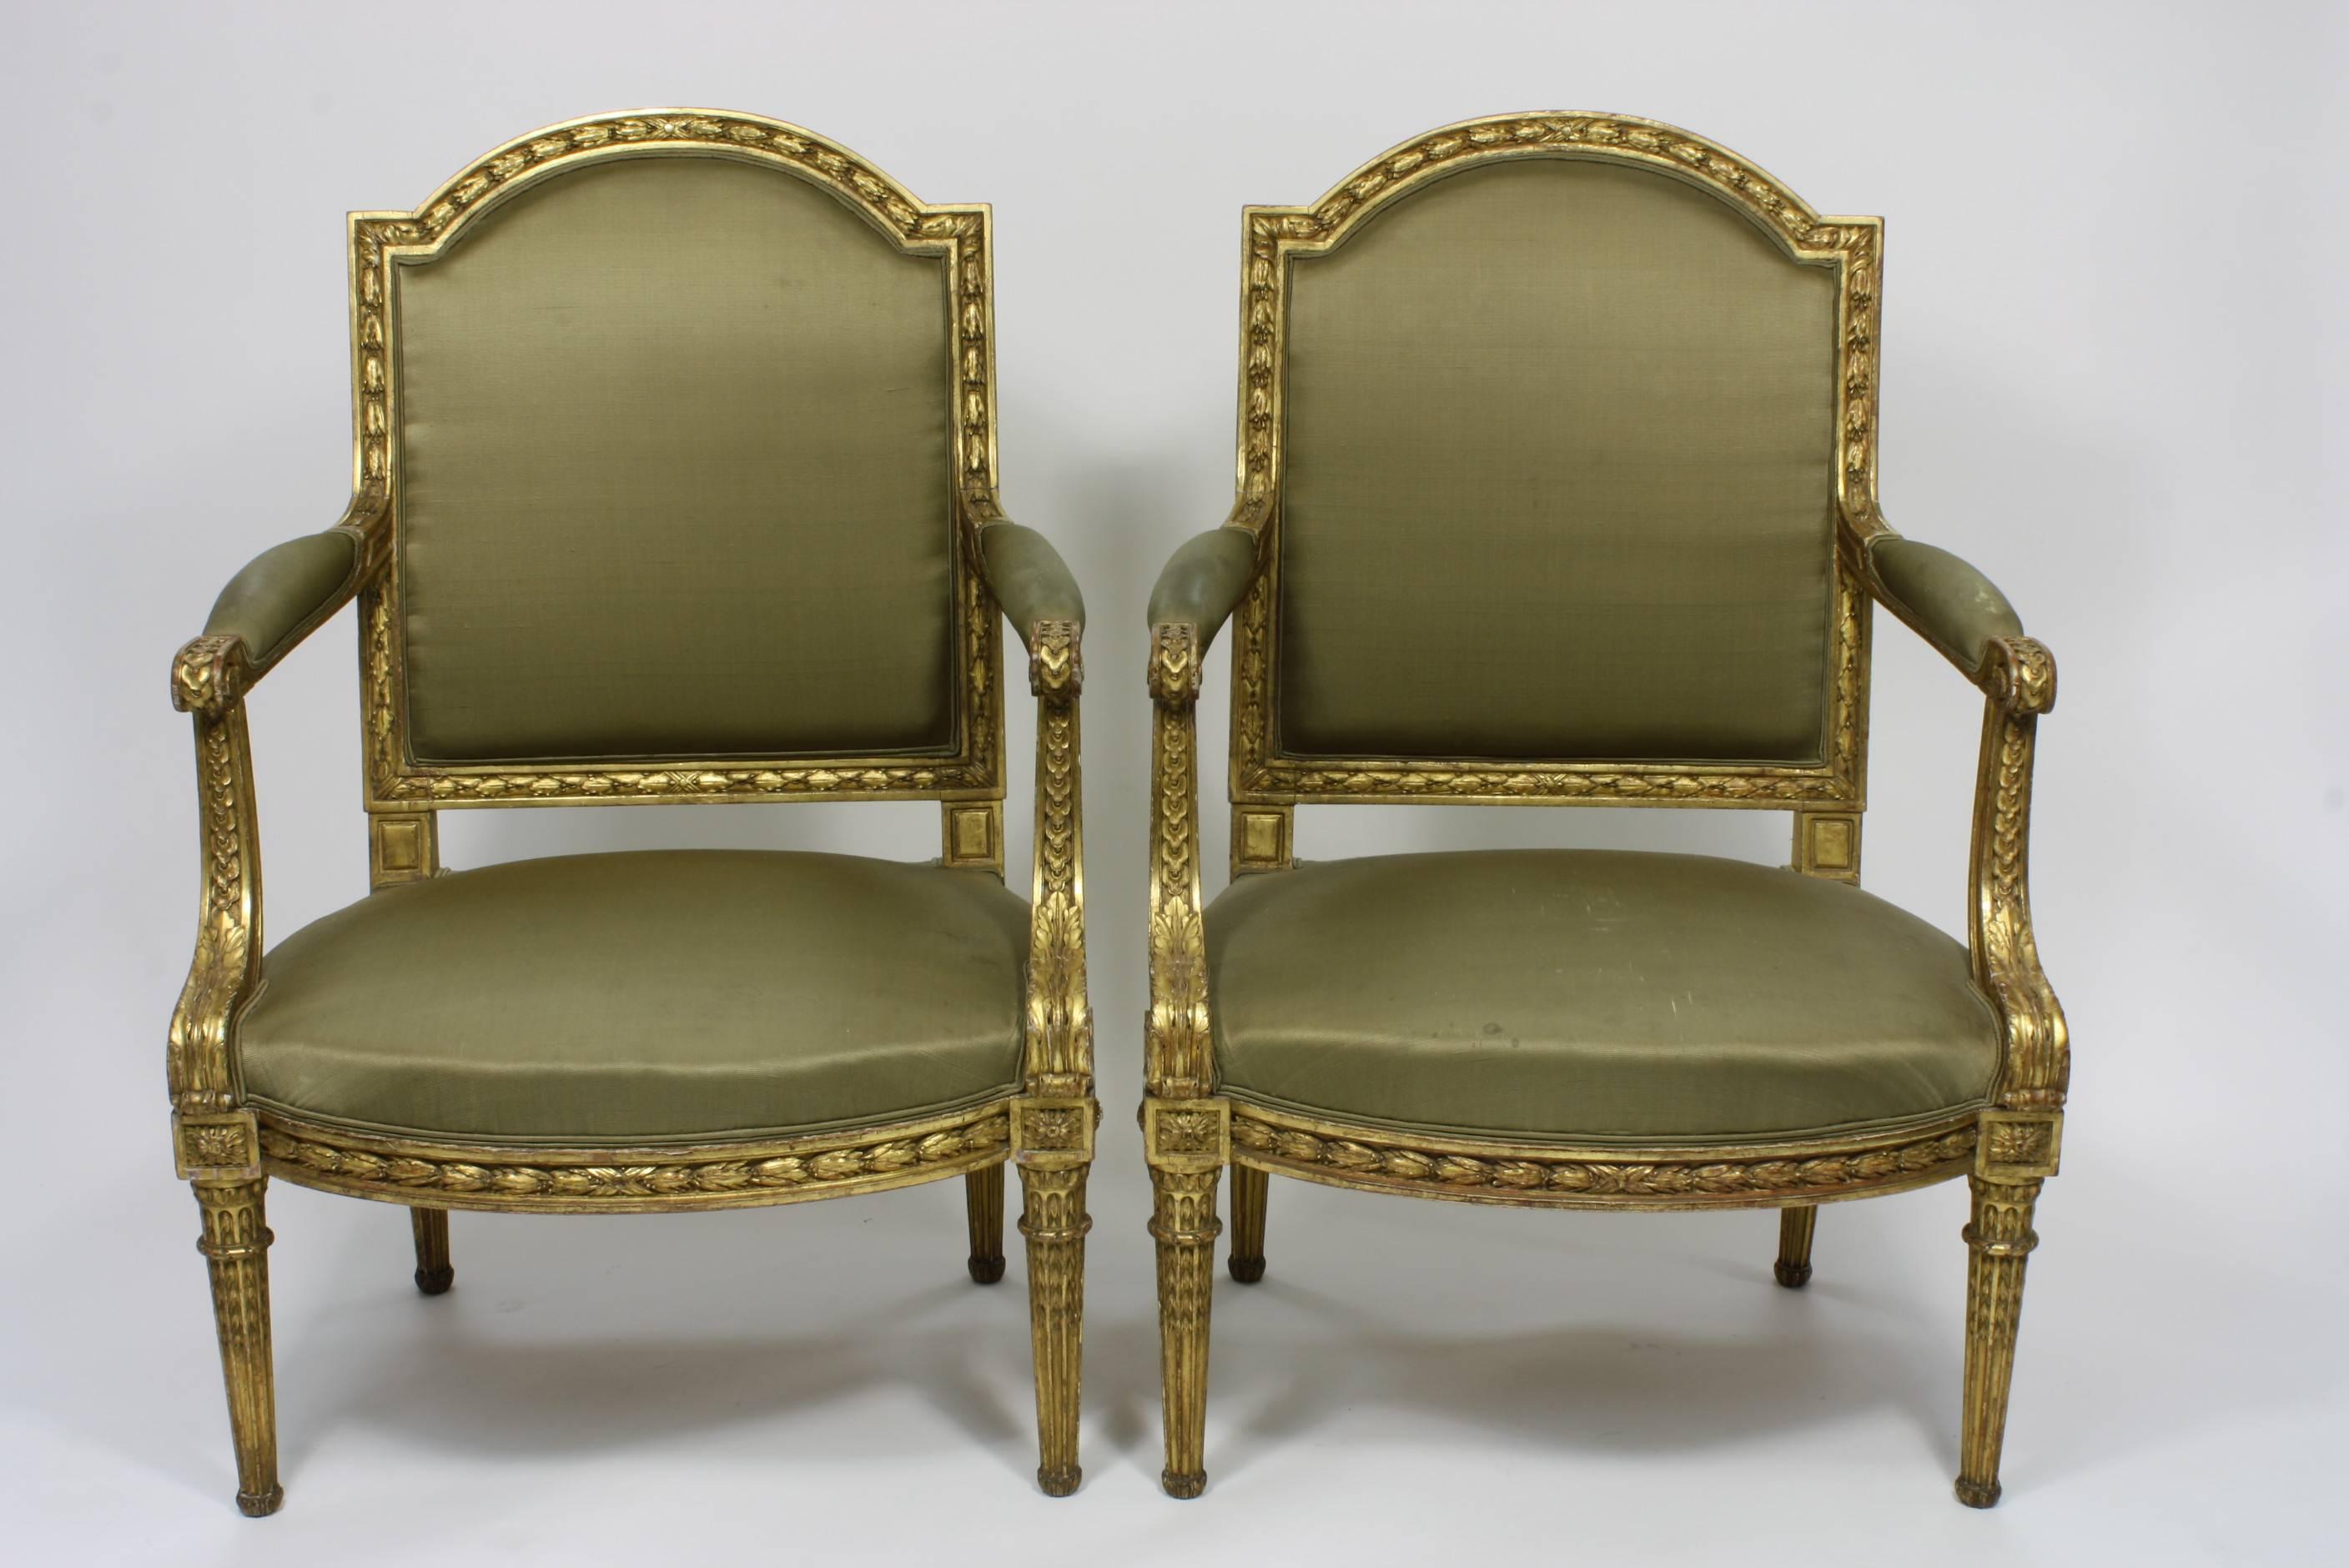 An elegant pair of 19th century French Louis XVI style giltwood armchairs or fauteuils. Nicely-carved guilloche patterning on the arms, terminating in scrolls with acanthus leaves. The backs and front seat rails are decorated with carved laurel